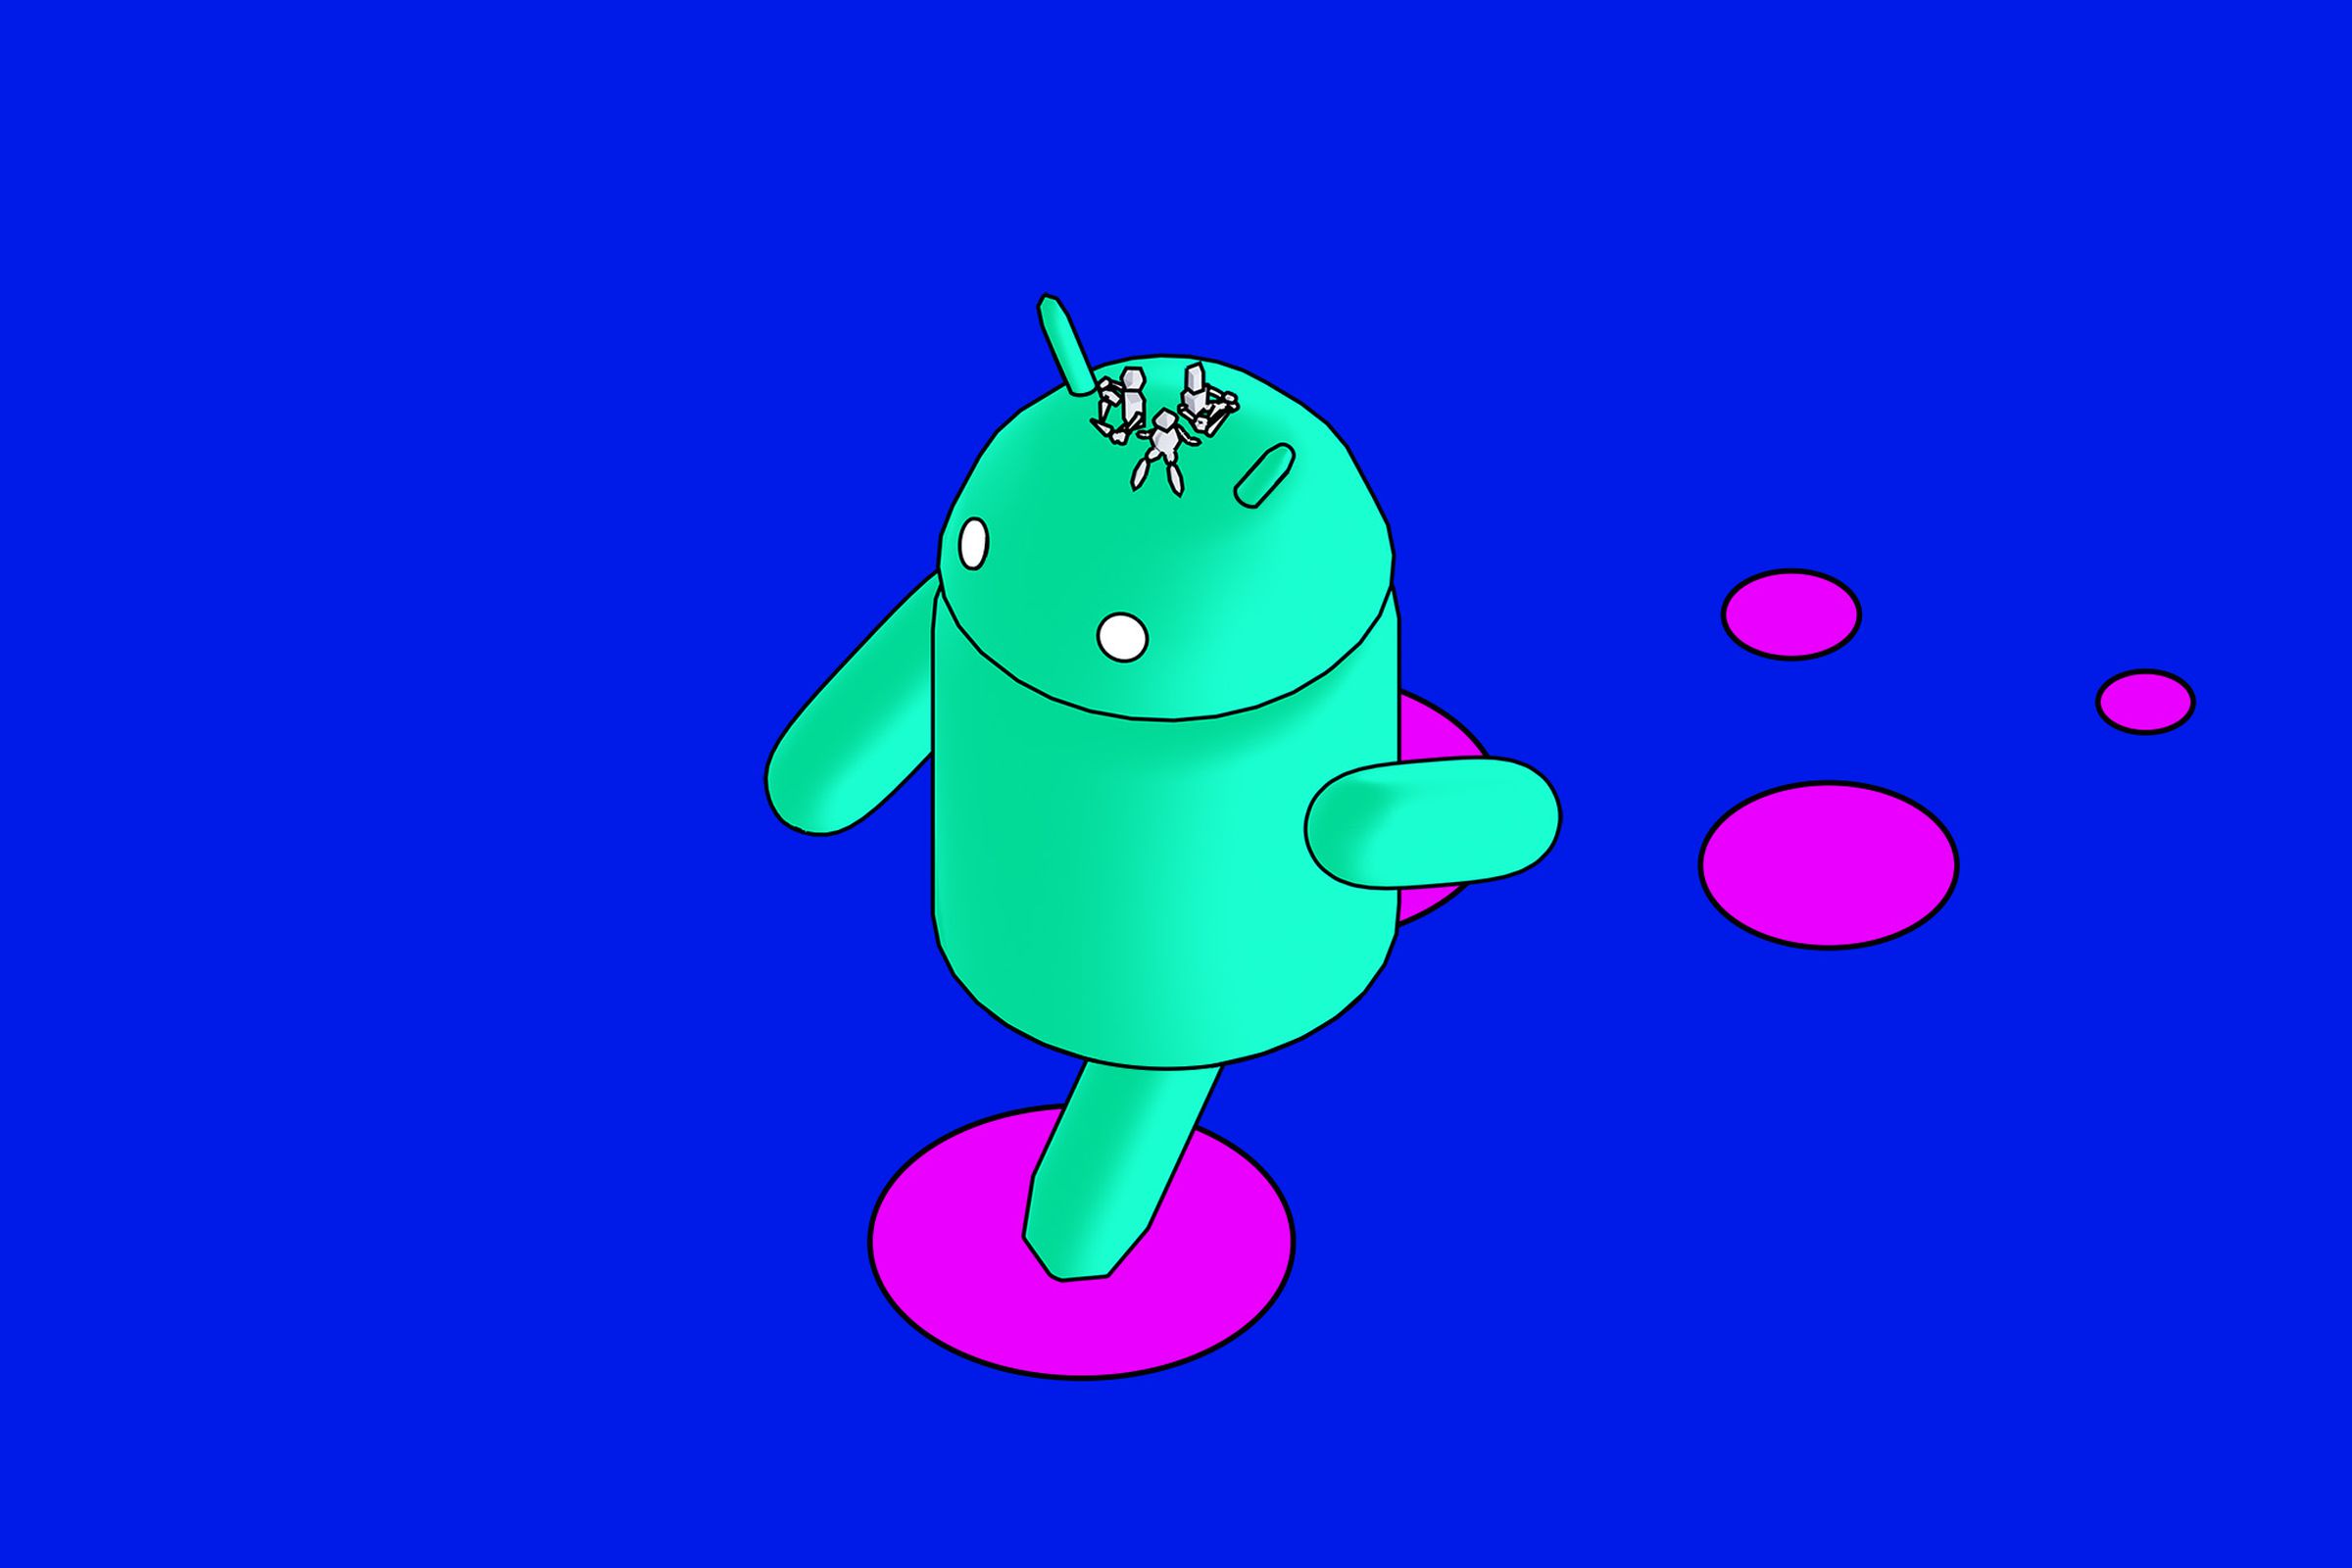 Three characters sit on top of a large android, inspired by the Android logo, across an open area.